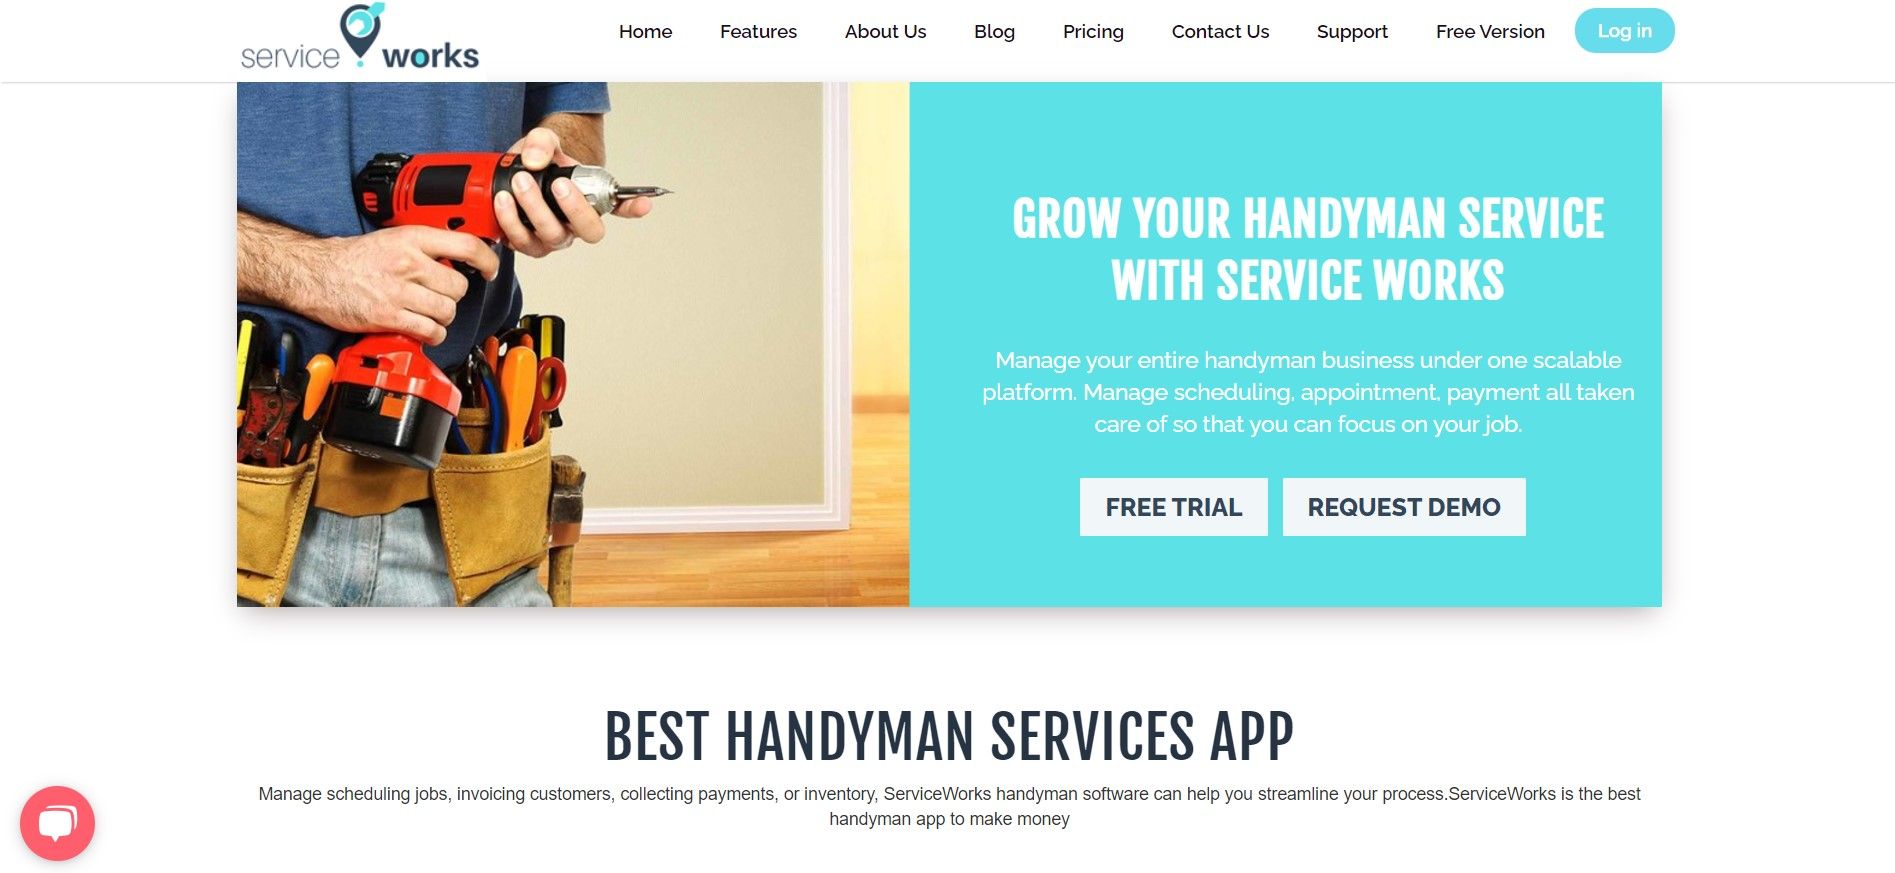 Serviceworks website page showing a handyman with a machine and says 'best handyman services app' in the bottom